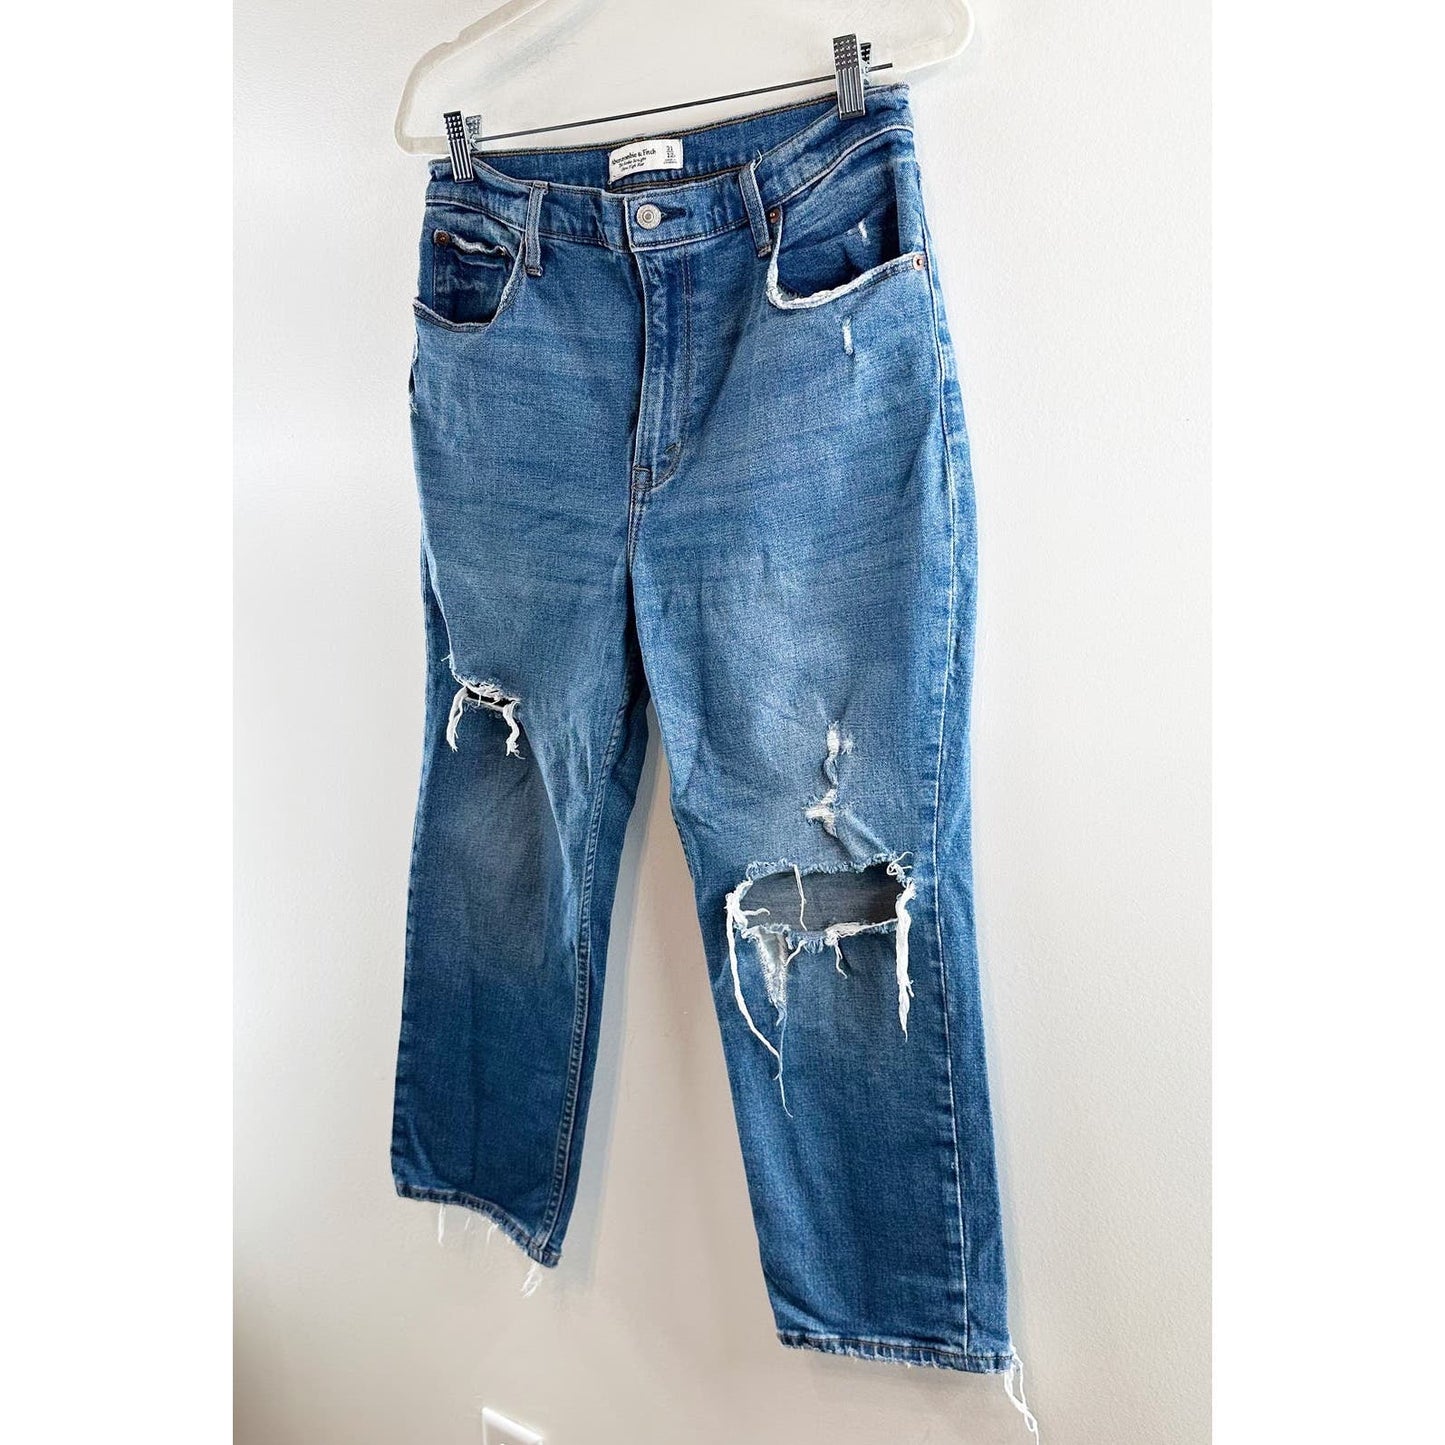 Abercrombie & Fitch The Ankle Straight Ultra High Rise Distressed Jeans Blue 12S